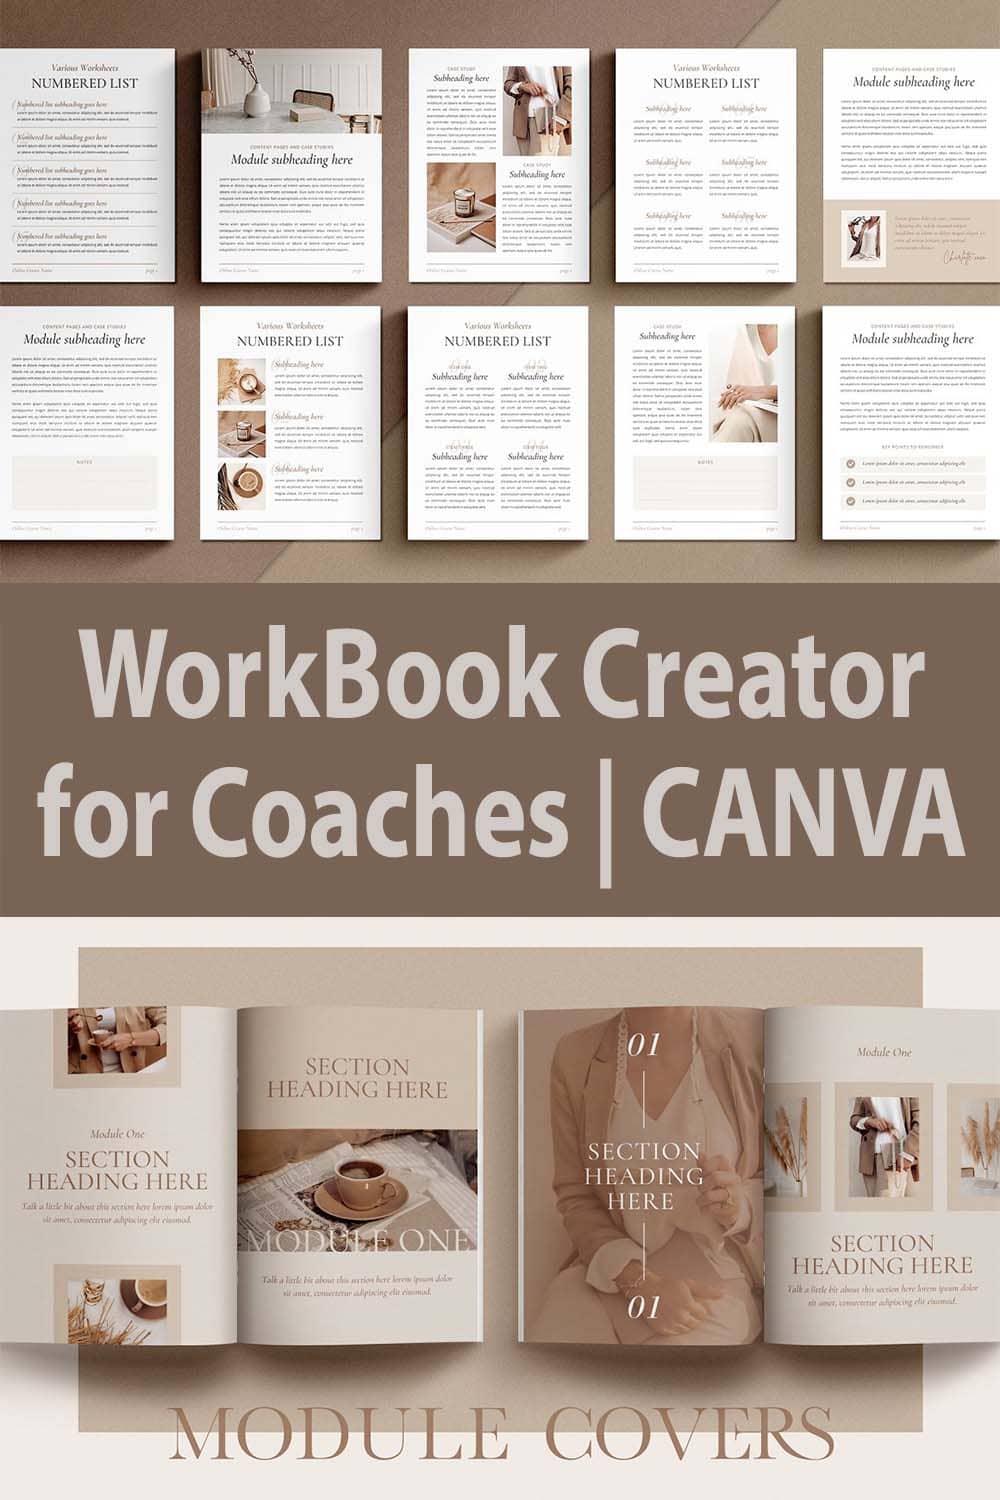 WorkBook Creator for Coaches CANVA pinterest image.